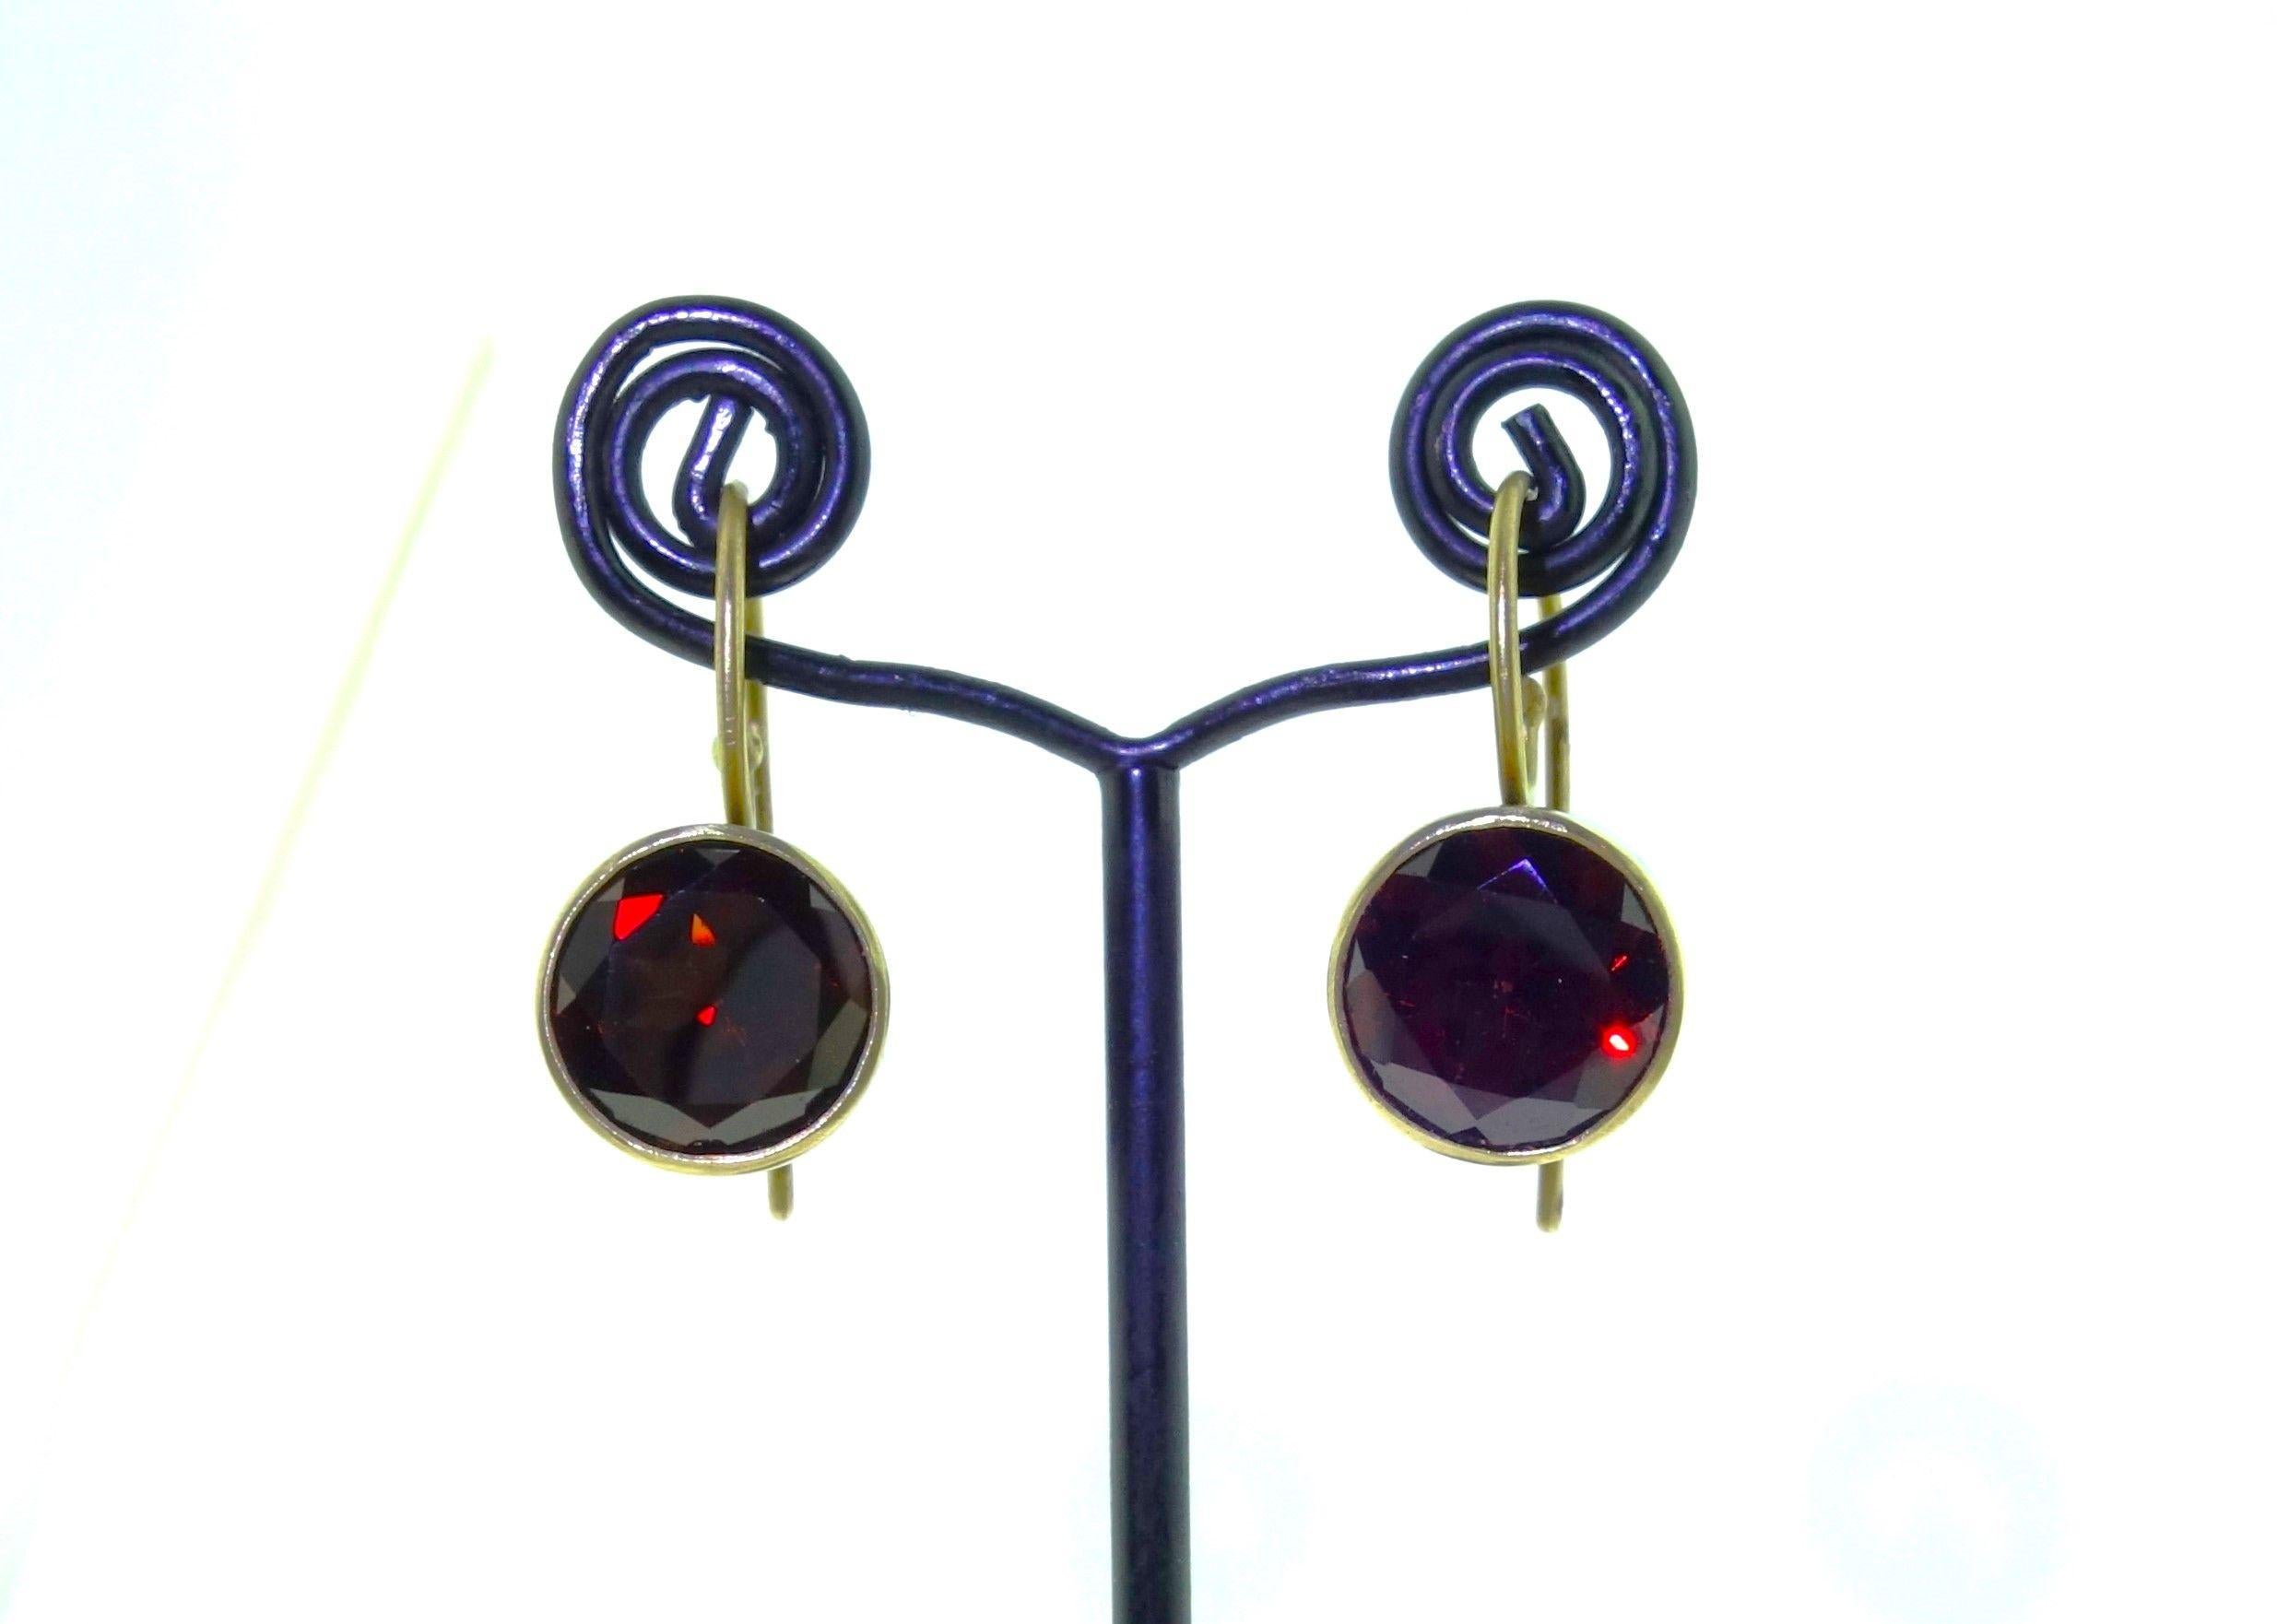 Simply Beautiful! Natural Garnet Gold and Sterling Silver Drop Earrings. Each Earring centering a 10mm Round Natural Garnet. Earring Size: 23mm long x 16mm x 10mm. Natural Swiss Blue Topaz weighing approx. 8.03tcw. Hand crafted Bi-metal Design 18K